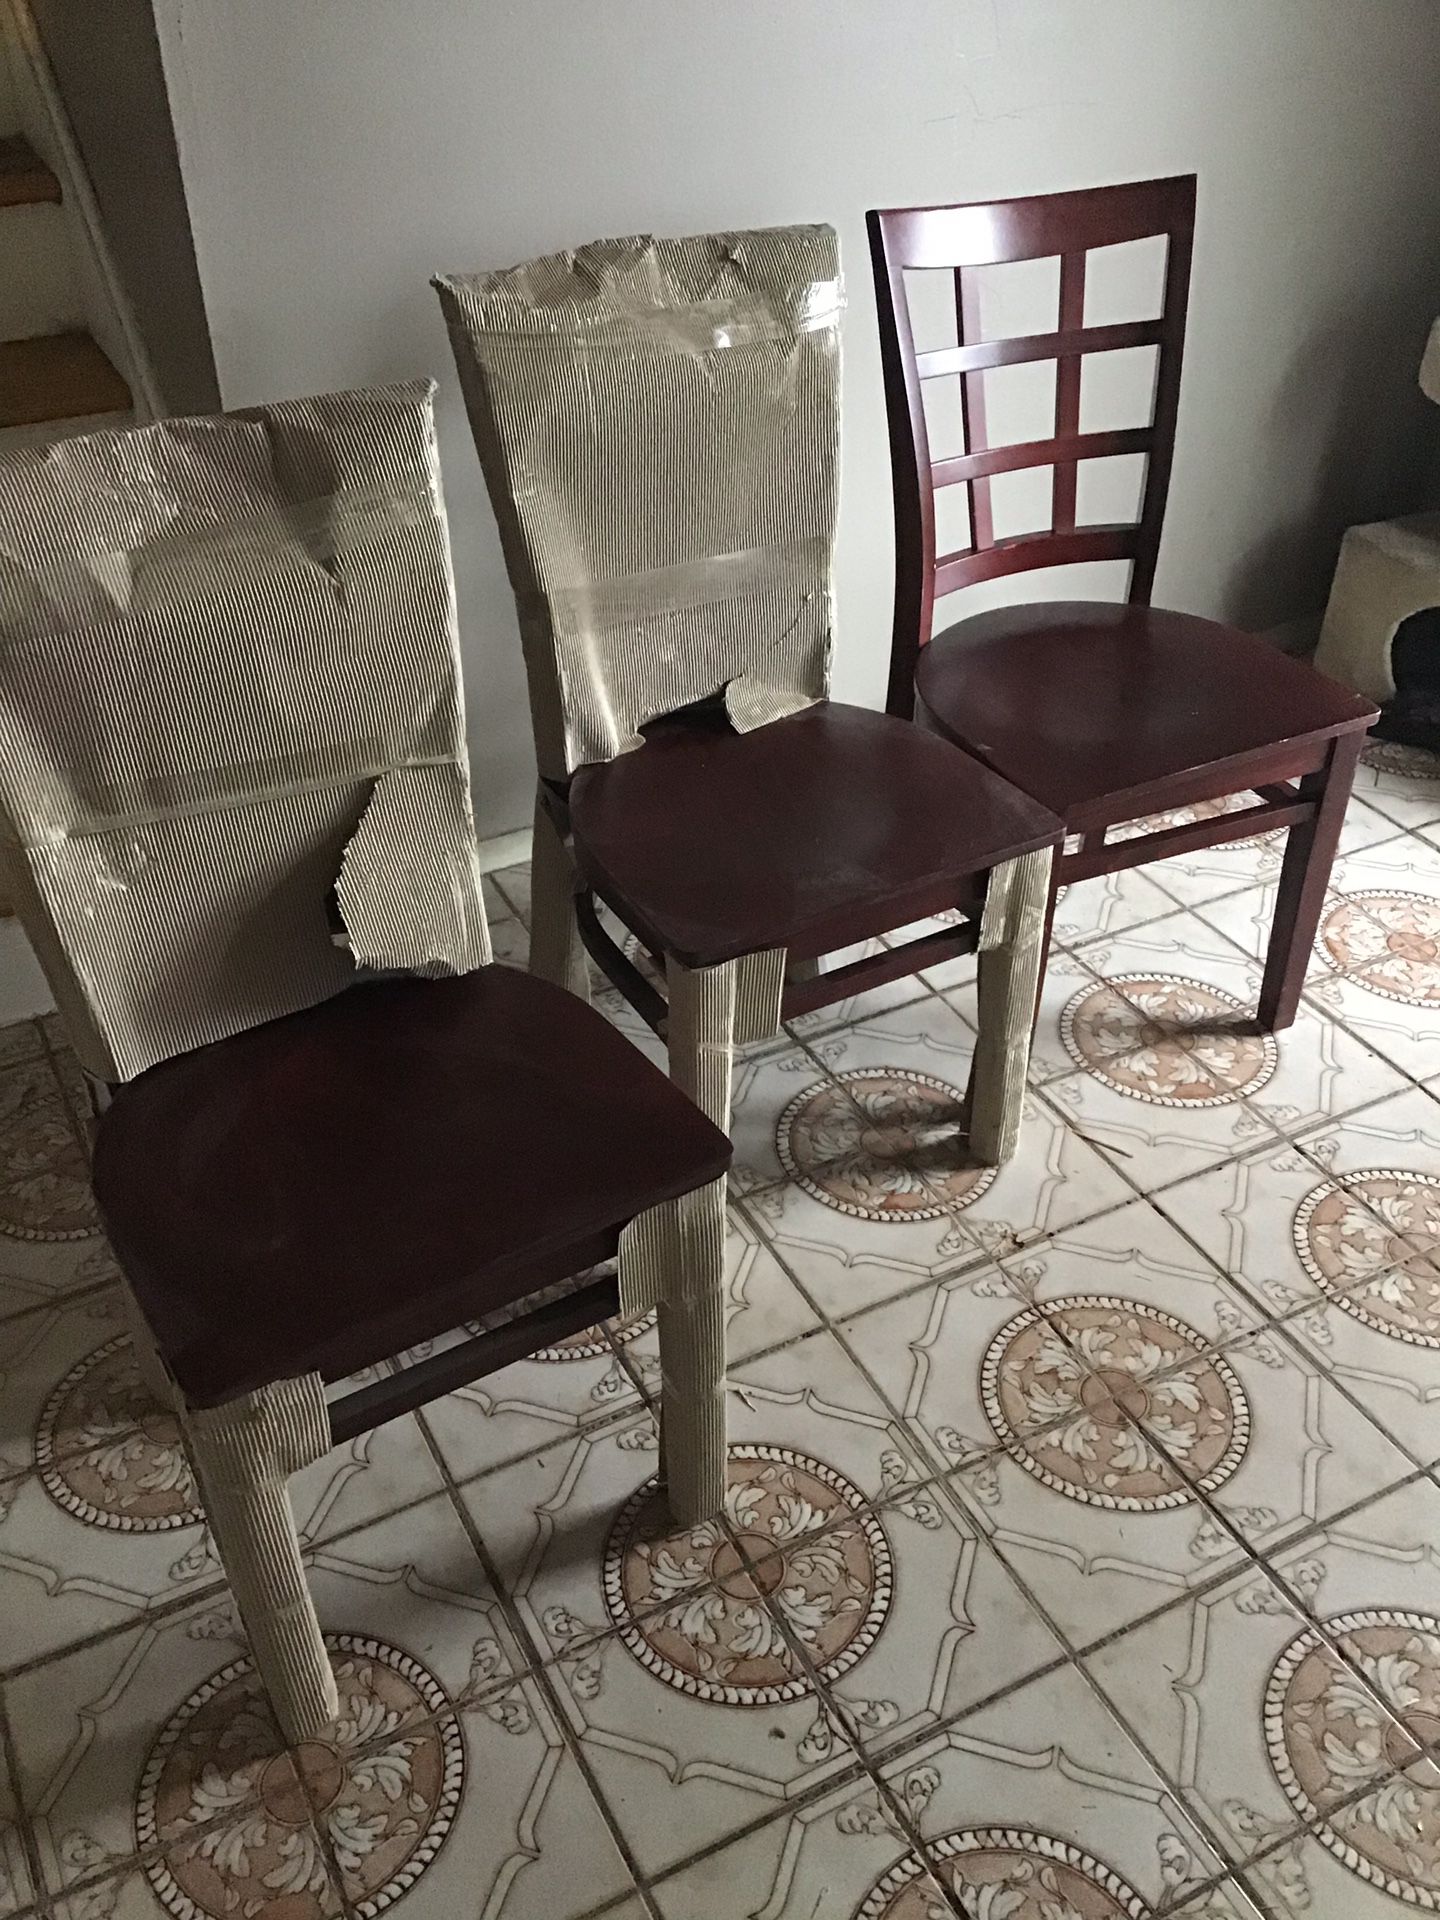 Brand new chairs and bar stool chairs, and misc new stuff